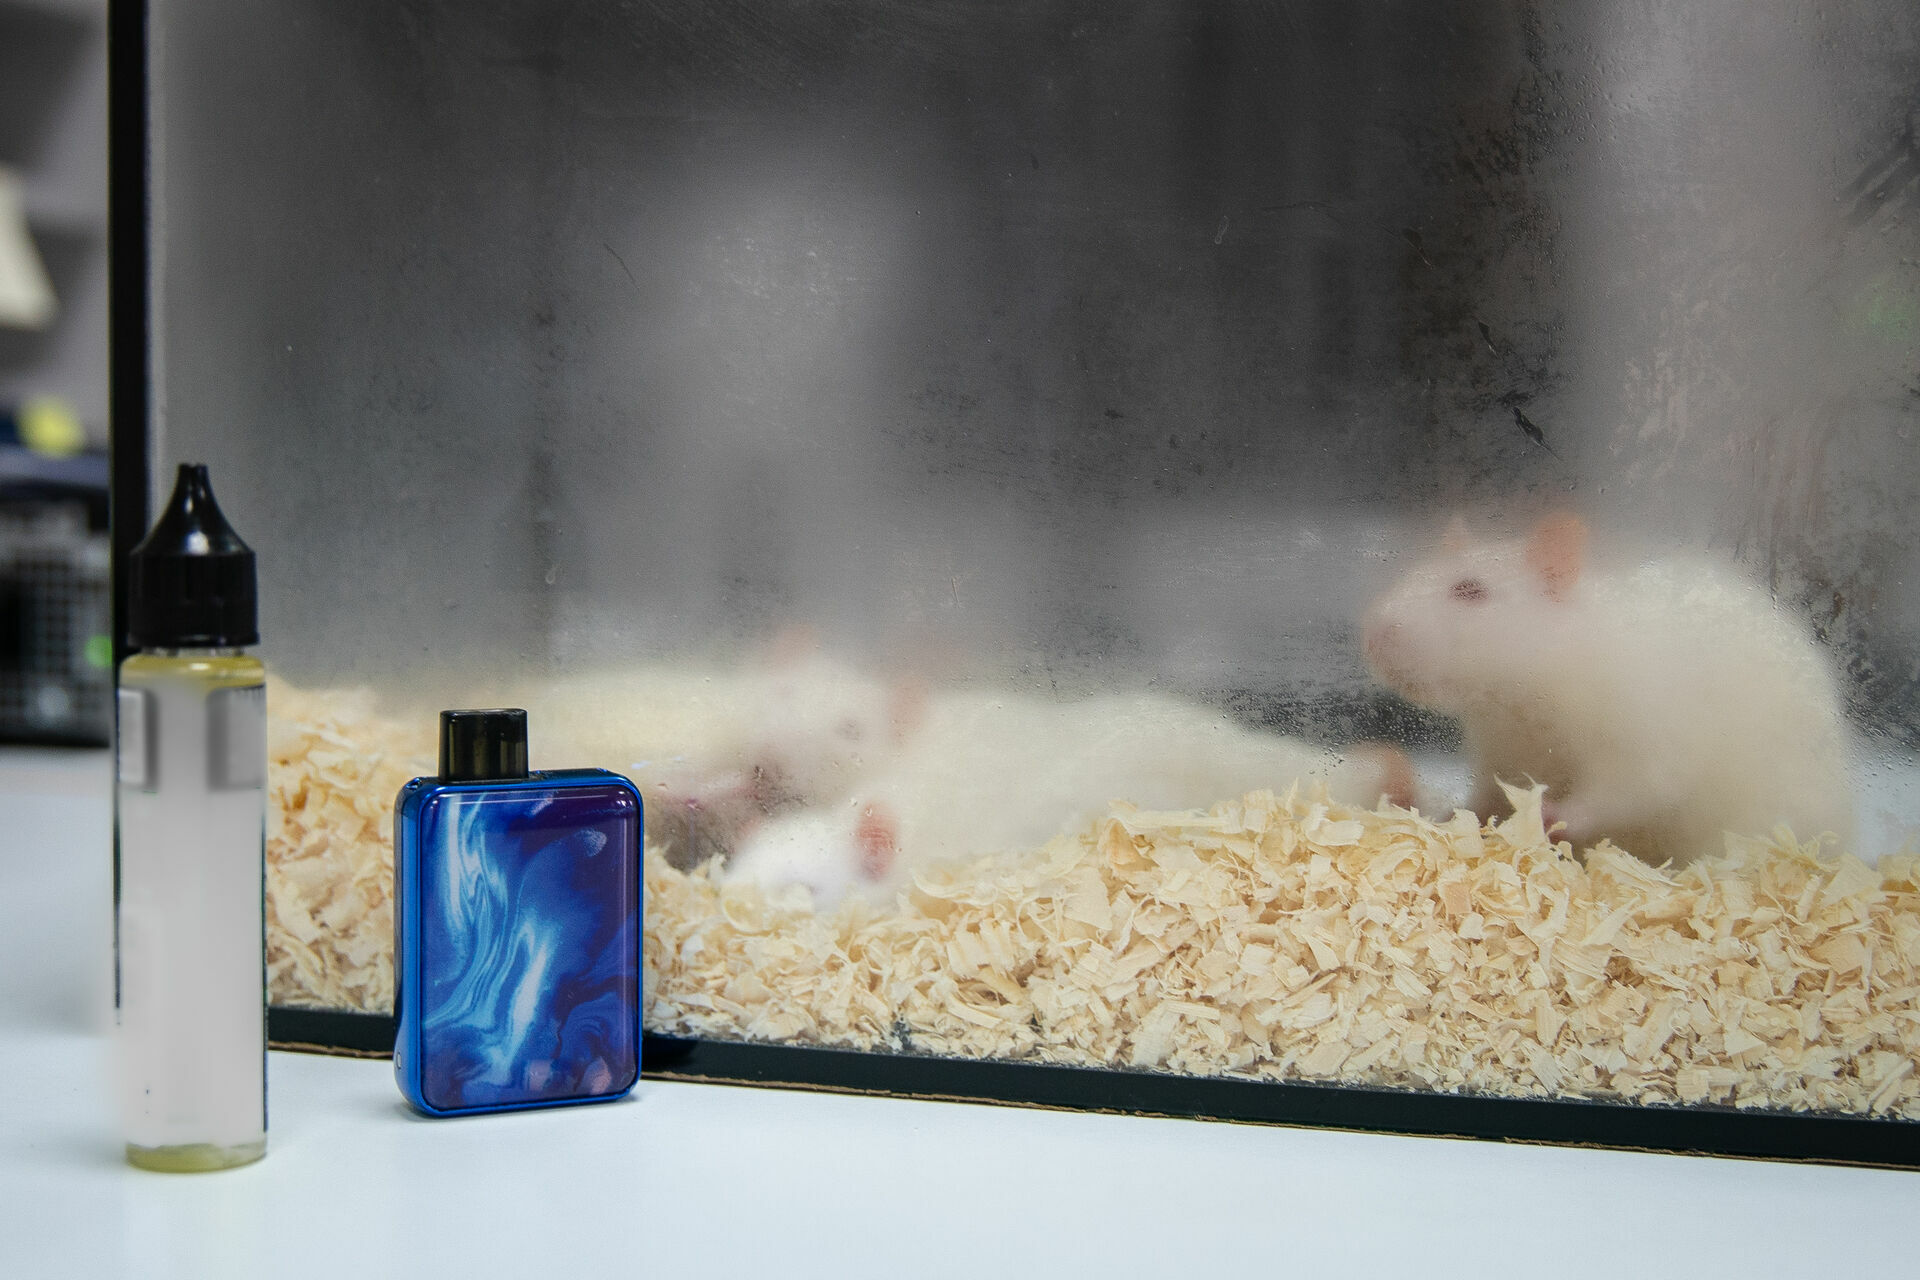 White rats show how vapors from e-cigarettes destroy lung tissue